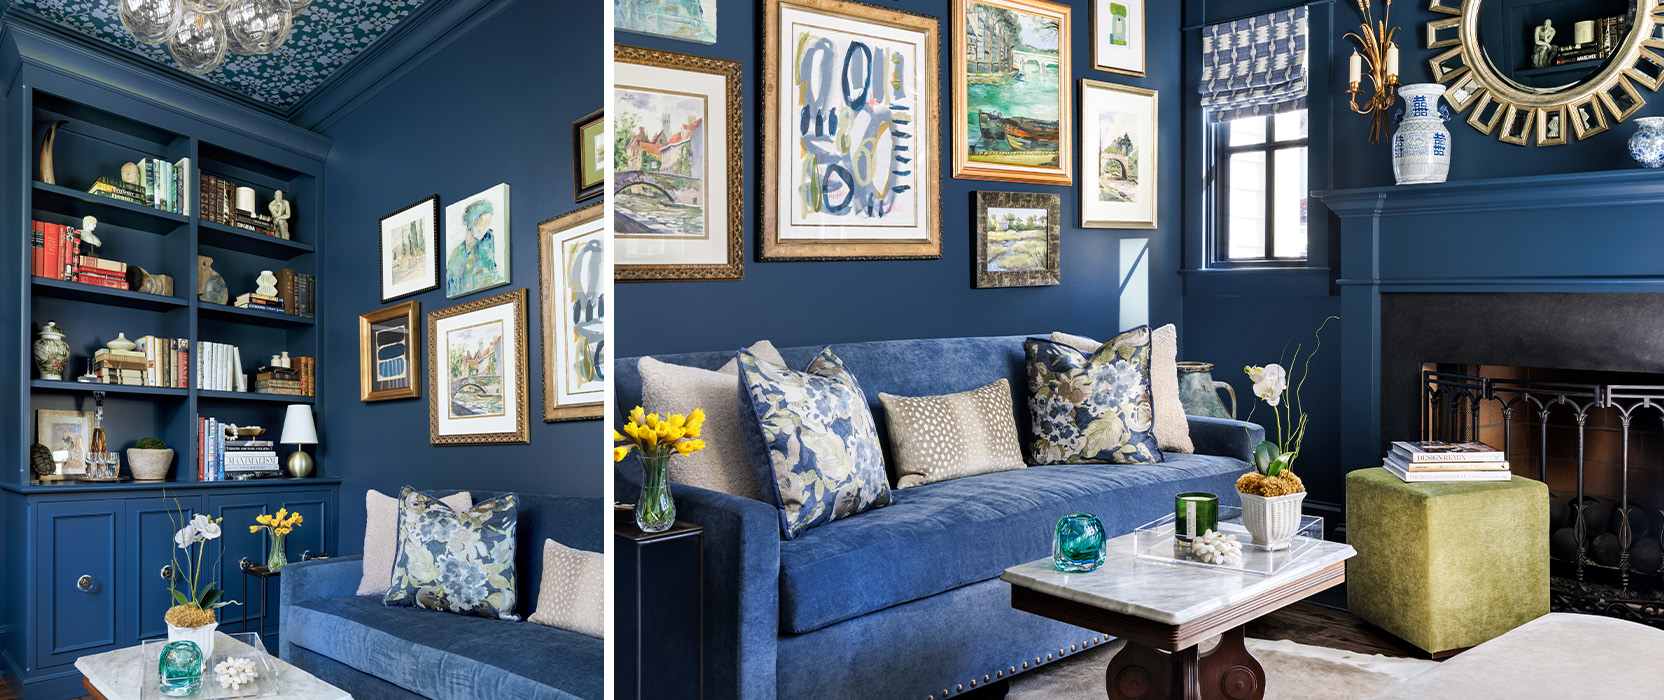 Maximalist style living room with dark blue walls, trim and sofa in front of gallery wall near built-in shelving and fireplace.